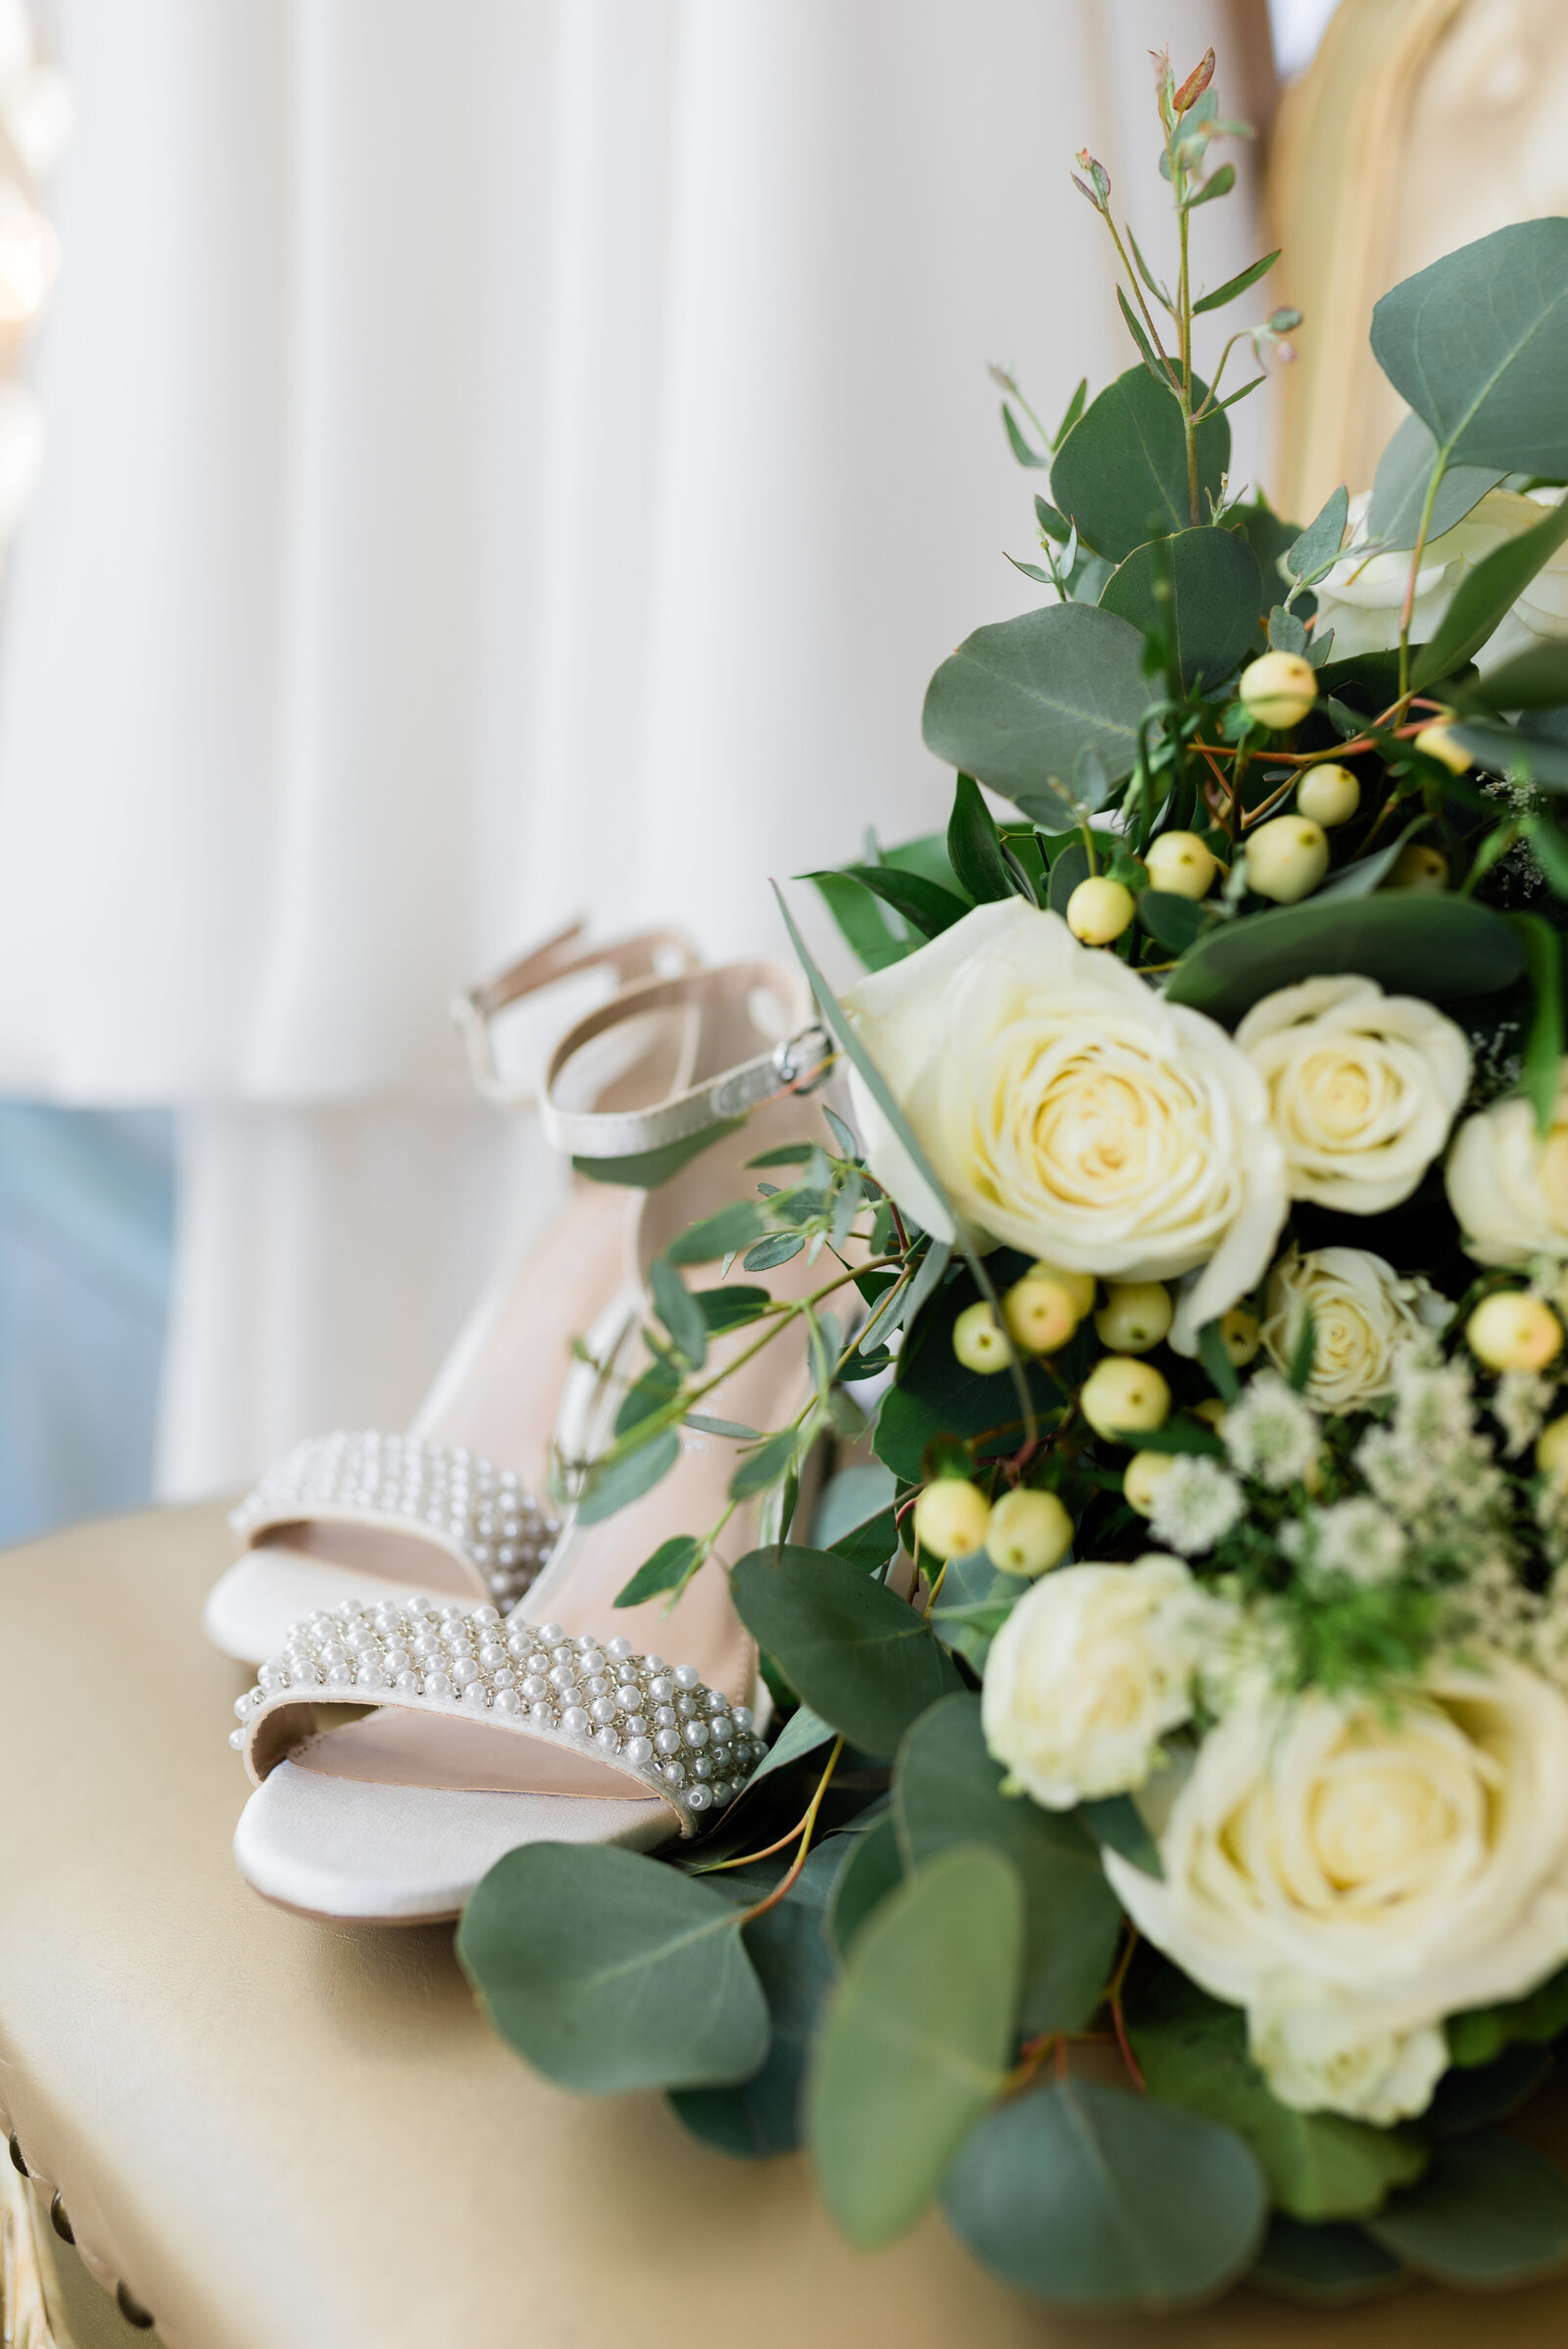 Detail of flowers, shoes, and wedding dress